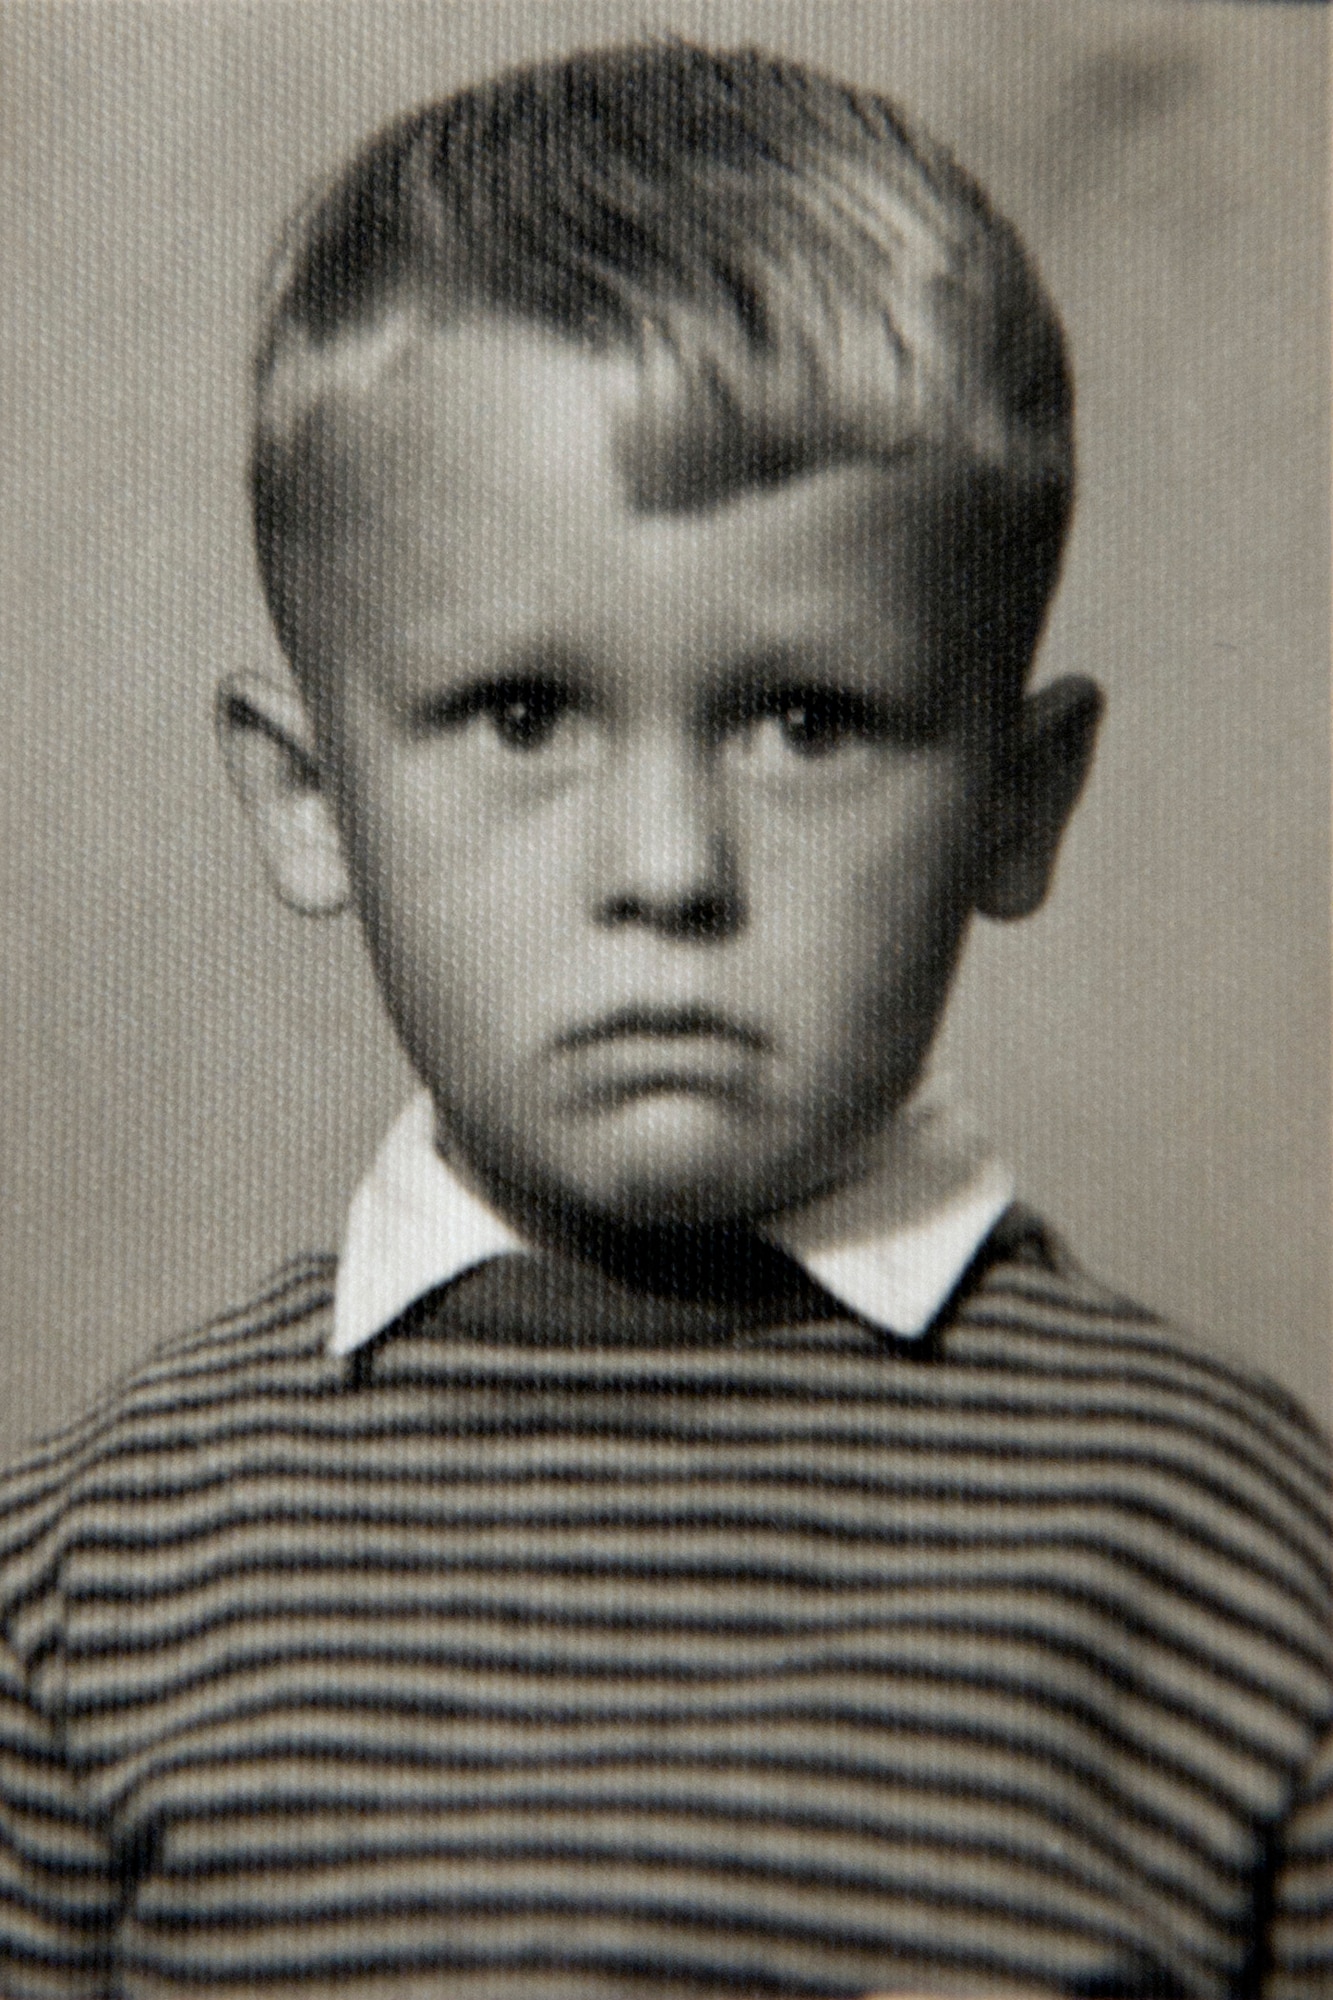 Lt. Gen. Frank Gorenc at age 4 poses for a passport portrait.